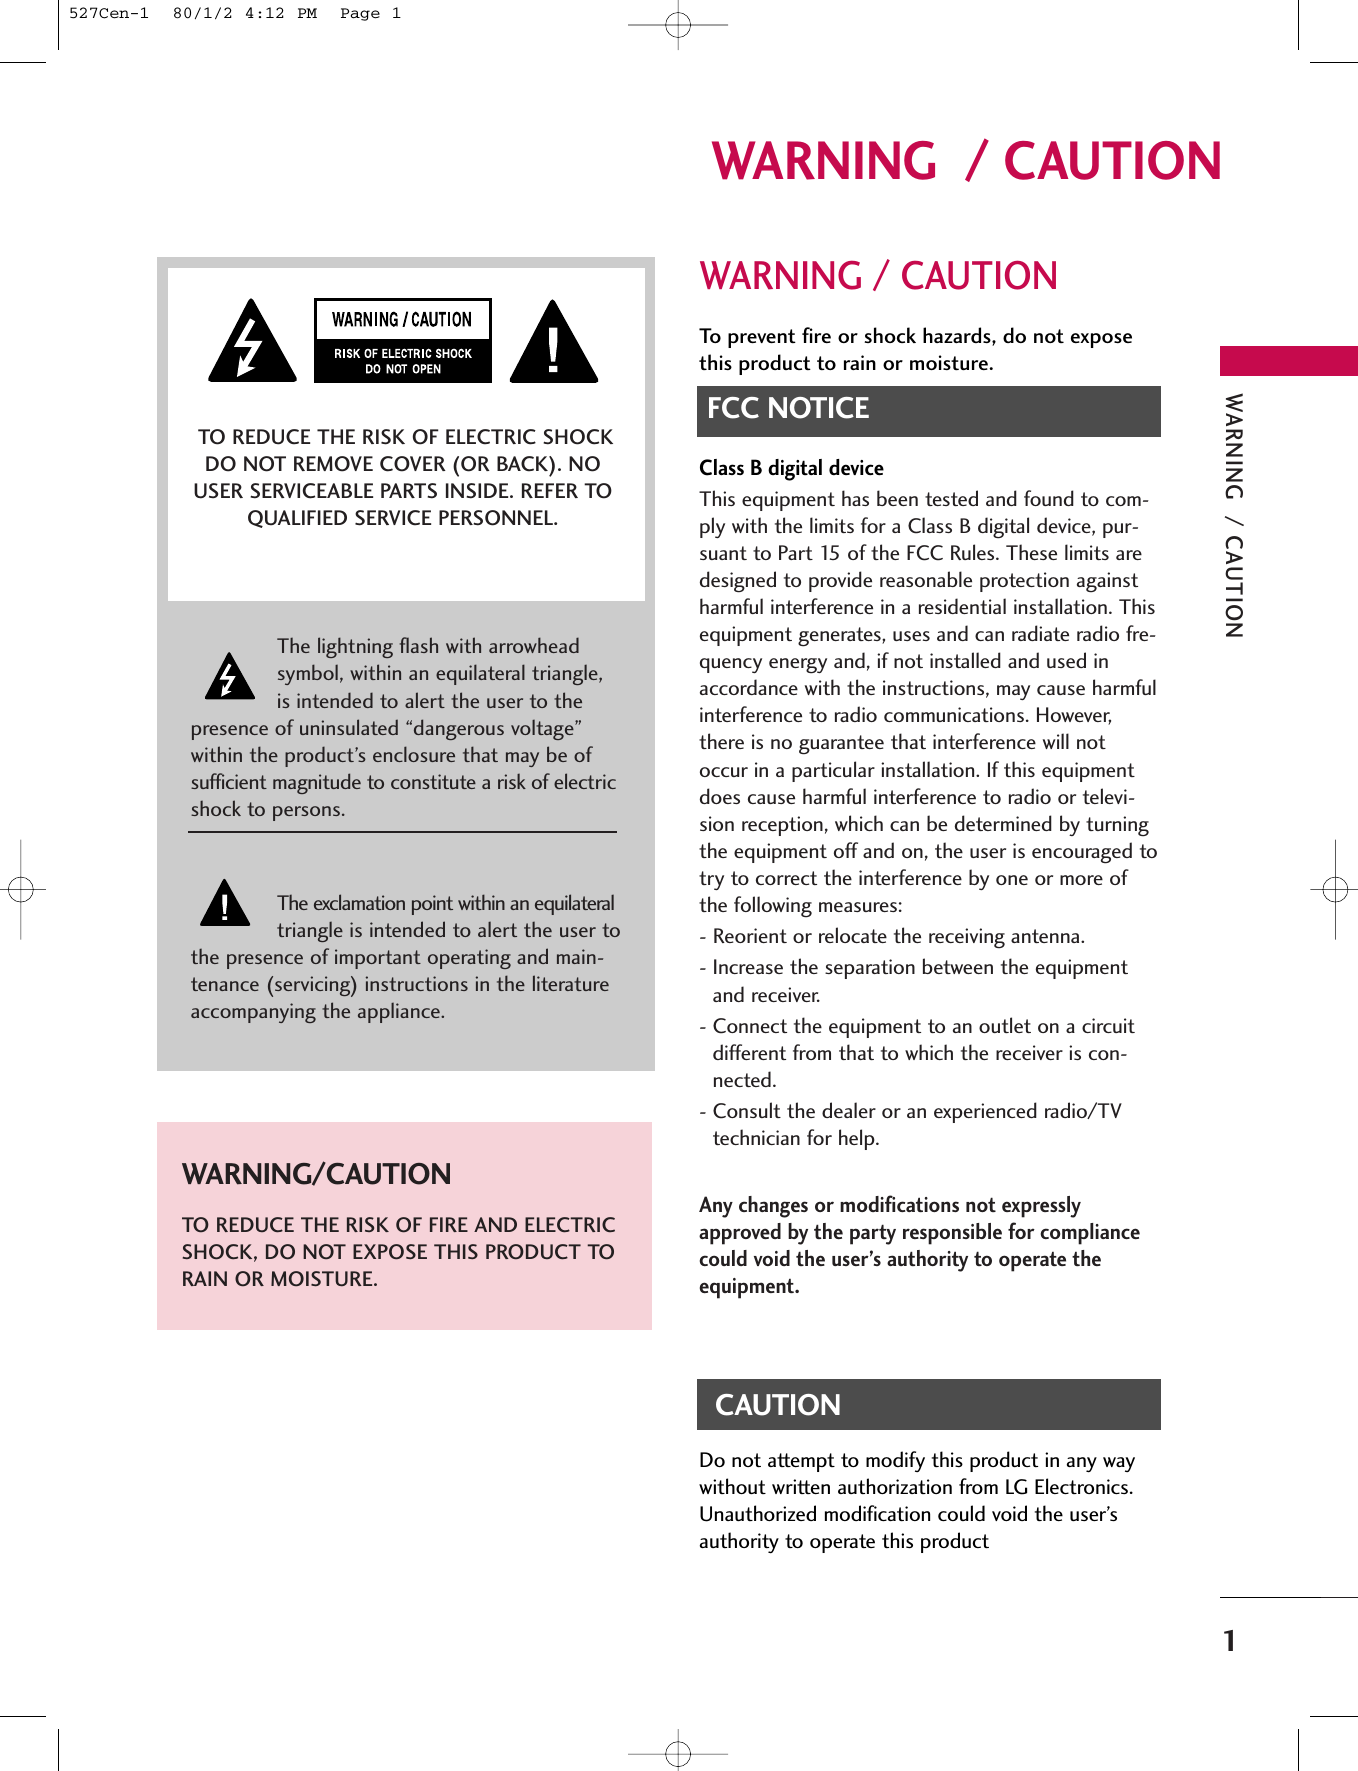 WARNING  / CAUTION1WARNING  / CAUTIONWARNING / CAUTIONTo prevent fire or shock hazards, do not exposethis product to rain or moisture.FCC NOTICEClass B digital deviceThis equipment has been tested and found to com-ply with the limits for a Class B digital device, pur-suant to Part 15 of the FCC Rules. These limits aredesigned to provide reasonable protection againstharmful interference in a residential installation. Thisequipment generates, uses and can radiate radio fre-quency energy and, if not installed and used inaccordance with the instructions, may cause harmfulinterference to radio communications. However,there is no guarantee that interference will notoccur in a particular installation. If this equipmentdoes cause harmful interference to radio or televi-sion reception, which can be determined by turningthe equipment off and on, the user is encouraged totry to correct the interference by one or more ofthe following measures:- Reorient or relocate the receiving antenna.- Increase the separation between the equipmentand receiver.- Connect the equipment to an outlet on a circuitdifferent from that to which the receiver is con-nected.- Consult the dealer or an experienced radio/TVtechnician for help.Any changes or modifications not expresslyapproved by the party responsible for compliancecould void the user’s authority to operate theequipment. CAUTIONDo not attempt to modify this product in any waywithout written authorization from LG Electronics.Unauthorized modification could void the user’sauthority to operate this product The lightning flash with arrowheadsymbol, within an equilateral triangle,is intended to alert the user to thepresence of uninsulated “dangerous voltage”within the product’s enclosure that may be ofsufficient magnitude to constitute a risk of electricshock to persons.The exclamation point within an equilateraltriangle is intended to alert the user tothe presence of important operating and main-tenance (servicing) instructions in the literatureaccompanying the appliance.TO REDUCE THE RISK OF ELECTRIC SHOCKDO NOT REMOVE COVER (OR BACK). NOUSER SERVICEABLE PARTS INSIDE. REFER TOQUALIFIED SERVICE PERSONNEL.WARNING/CAUTIONTO REDUCE THE RISK OF FIRE AND ELECTRICSHOCK, DO NOT EXPOSE THIS PRODUCT TORAIN OR MOISTURE.527Cen-1  80/1/2 4:12 PM  Page 1